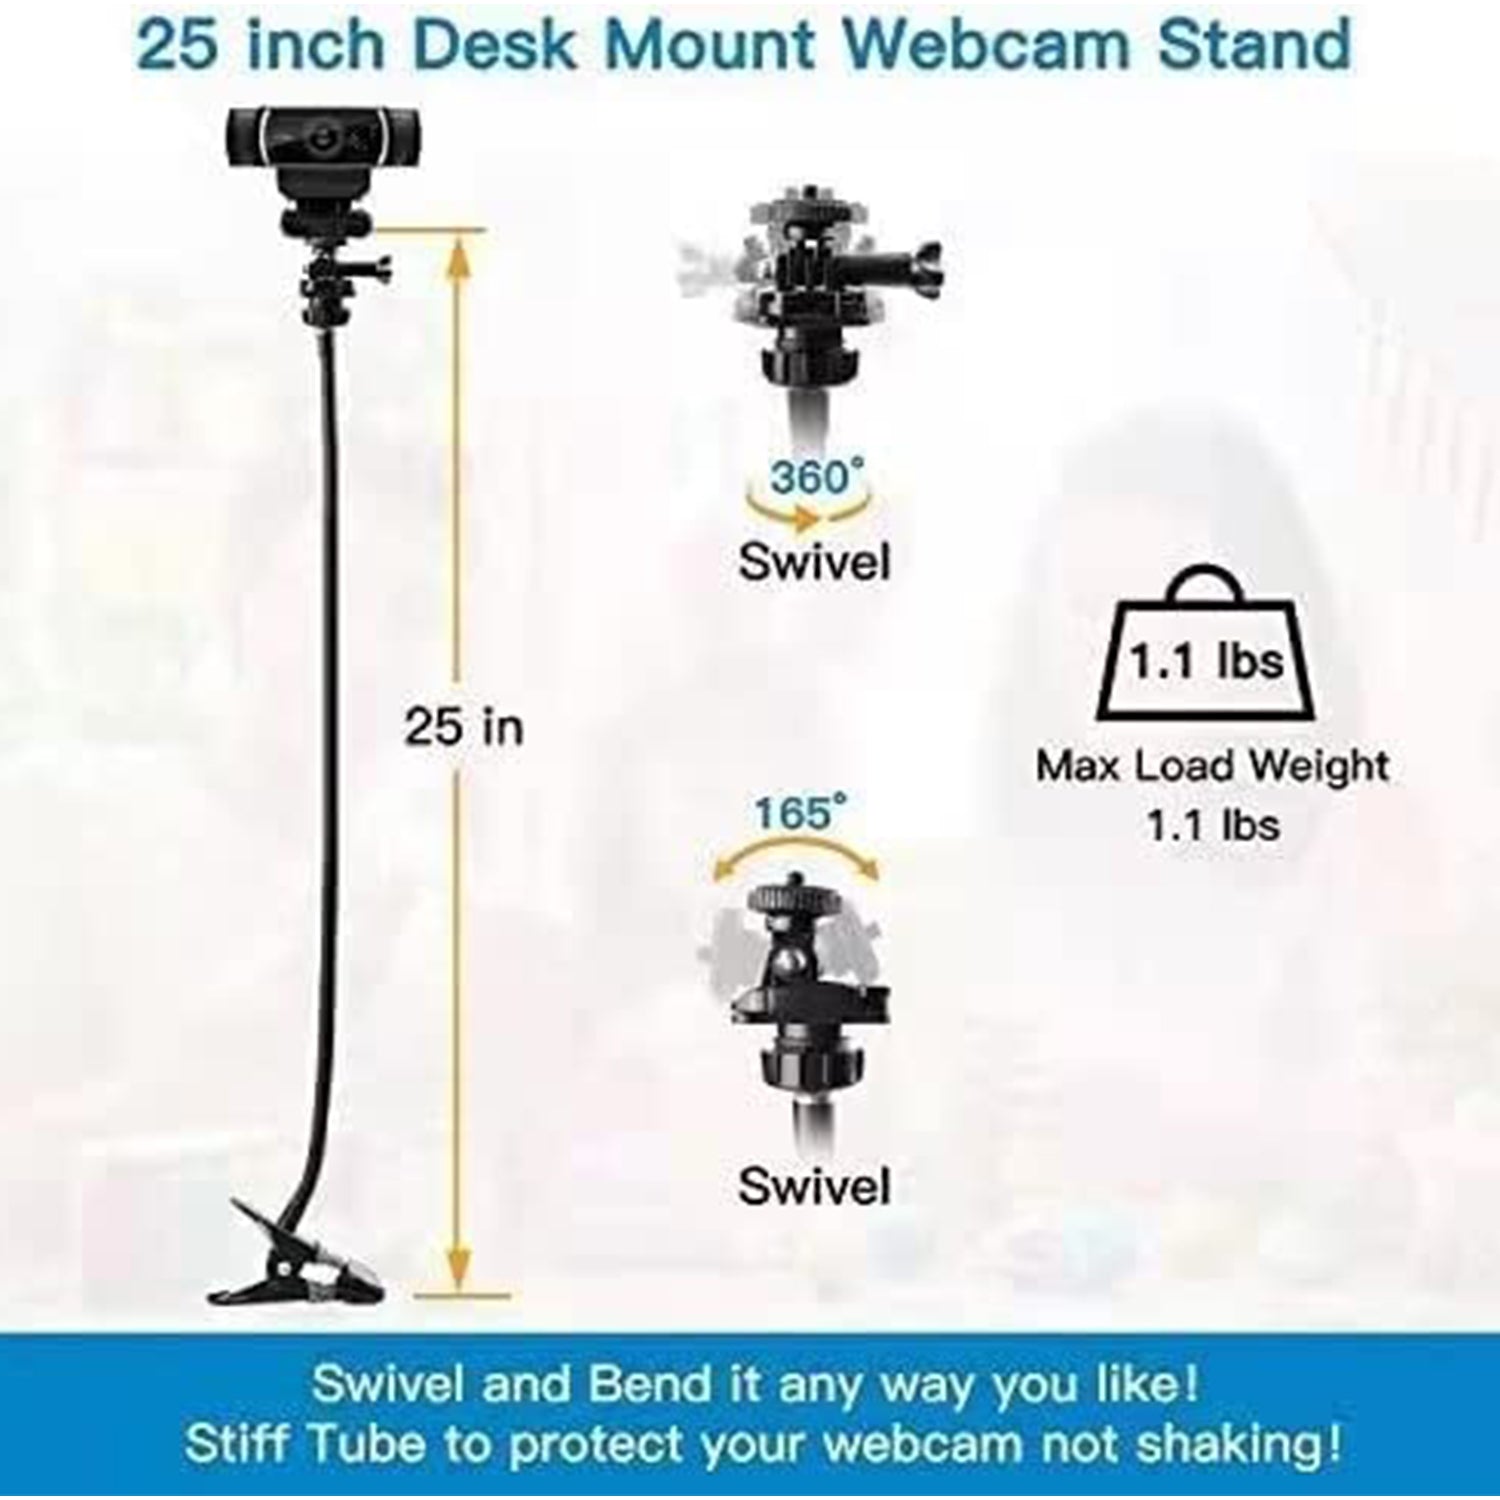 25 Inch Webcam Stand